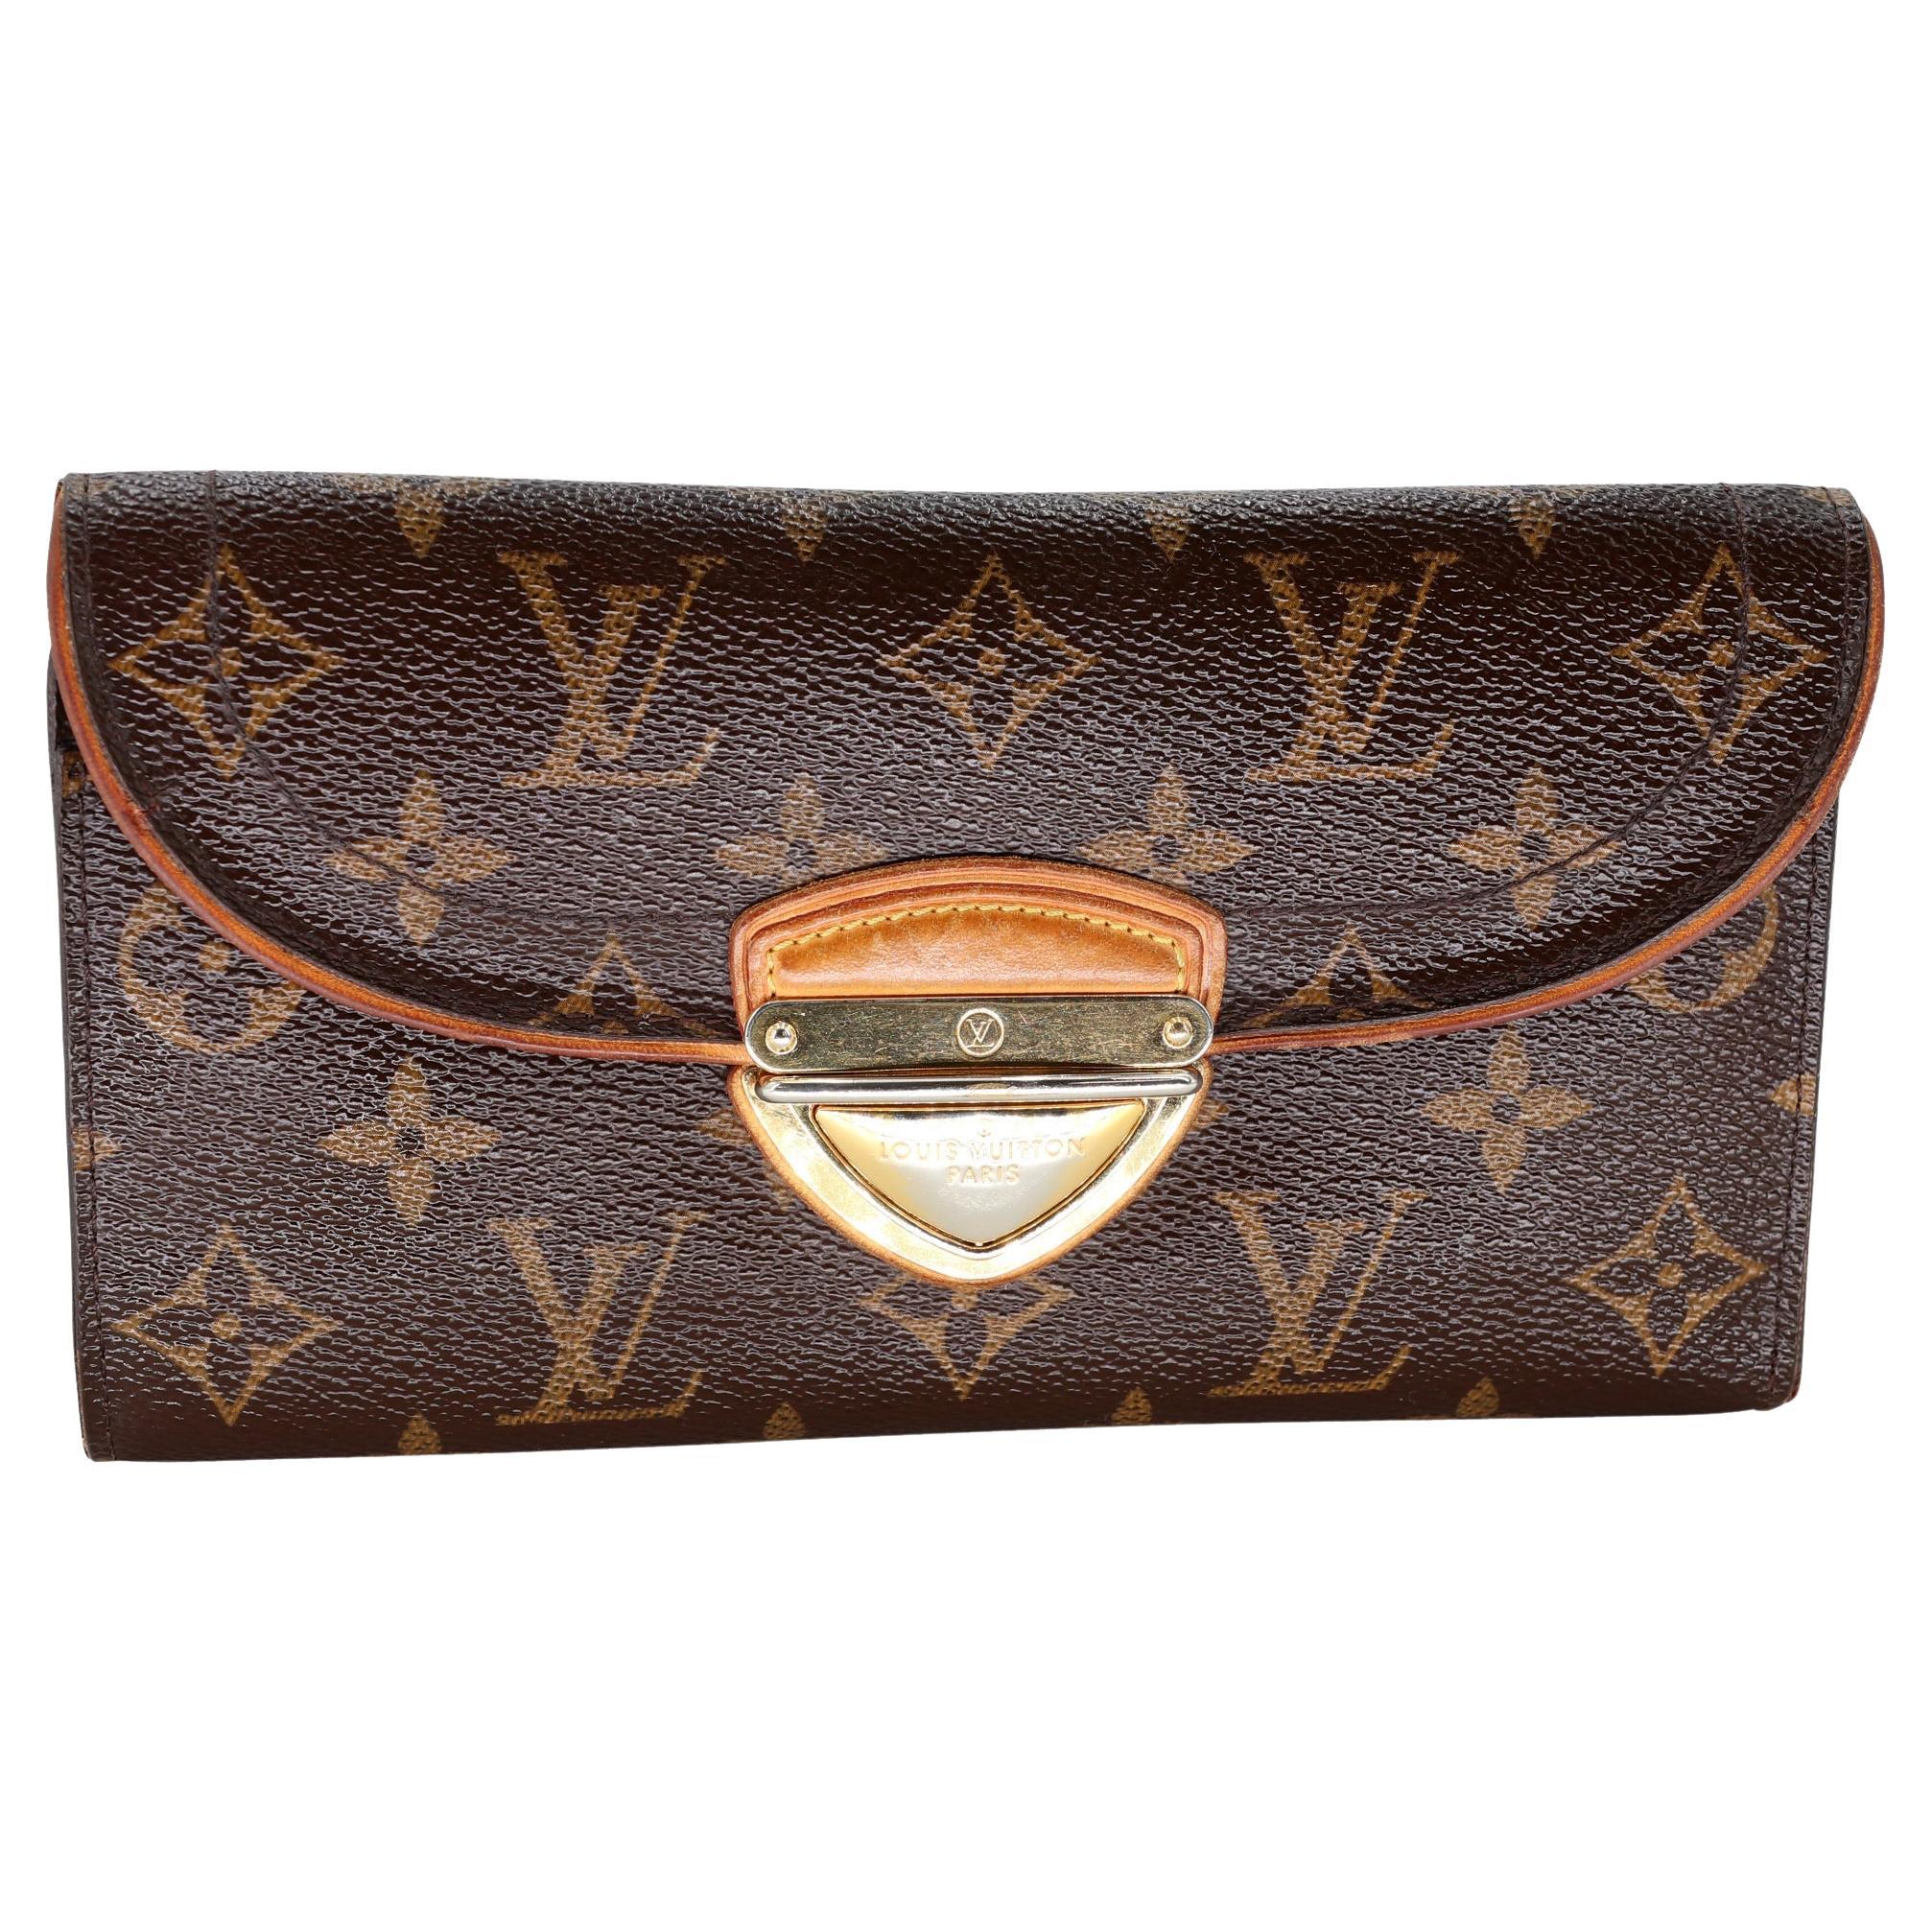 Louis Vuitton On The Go Purse And Wallet for Sale in Tampa, FL